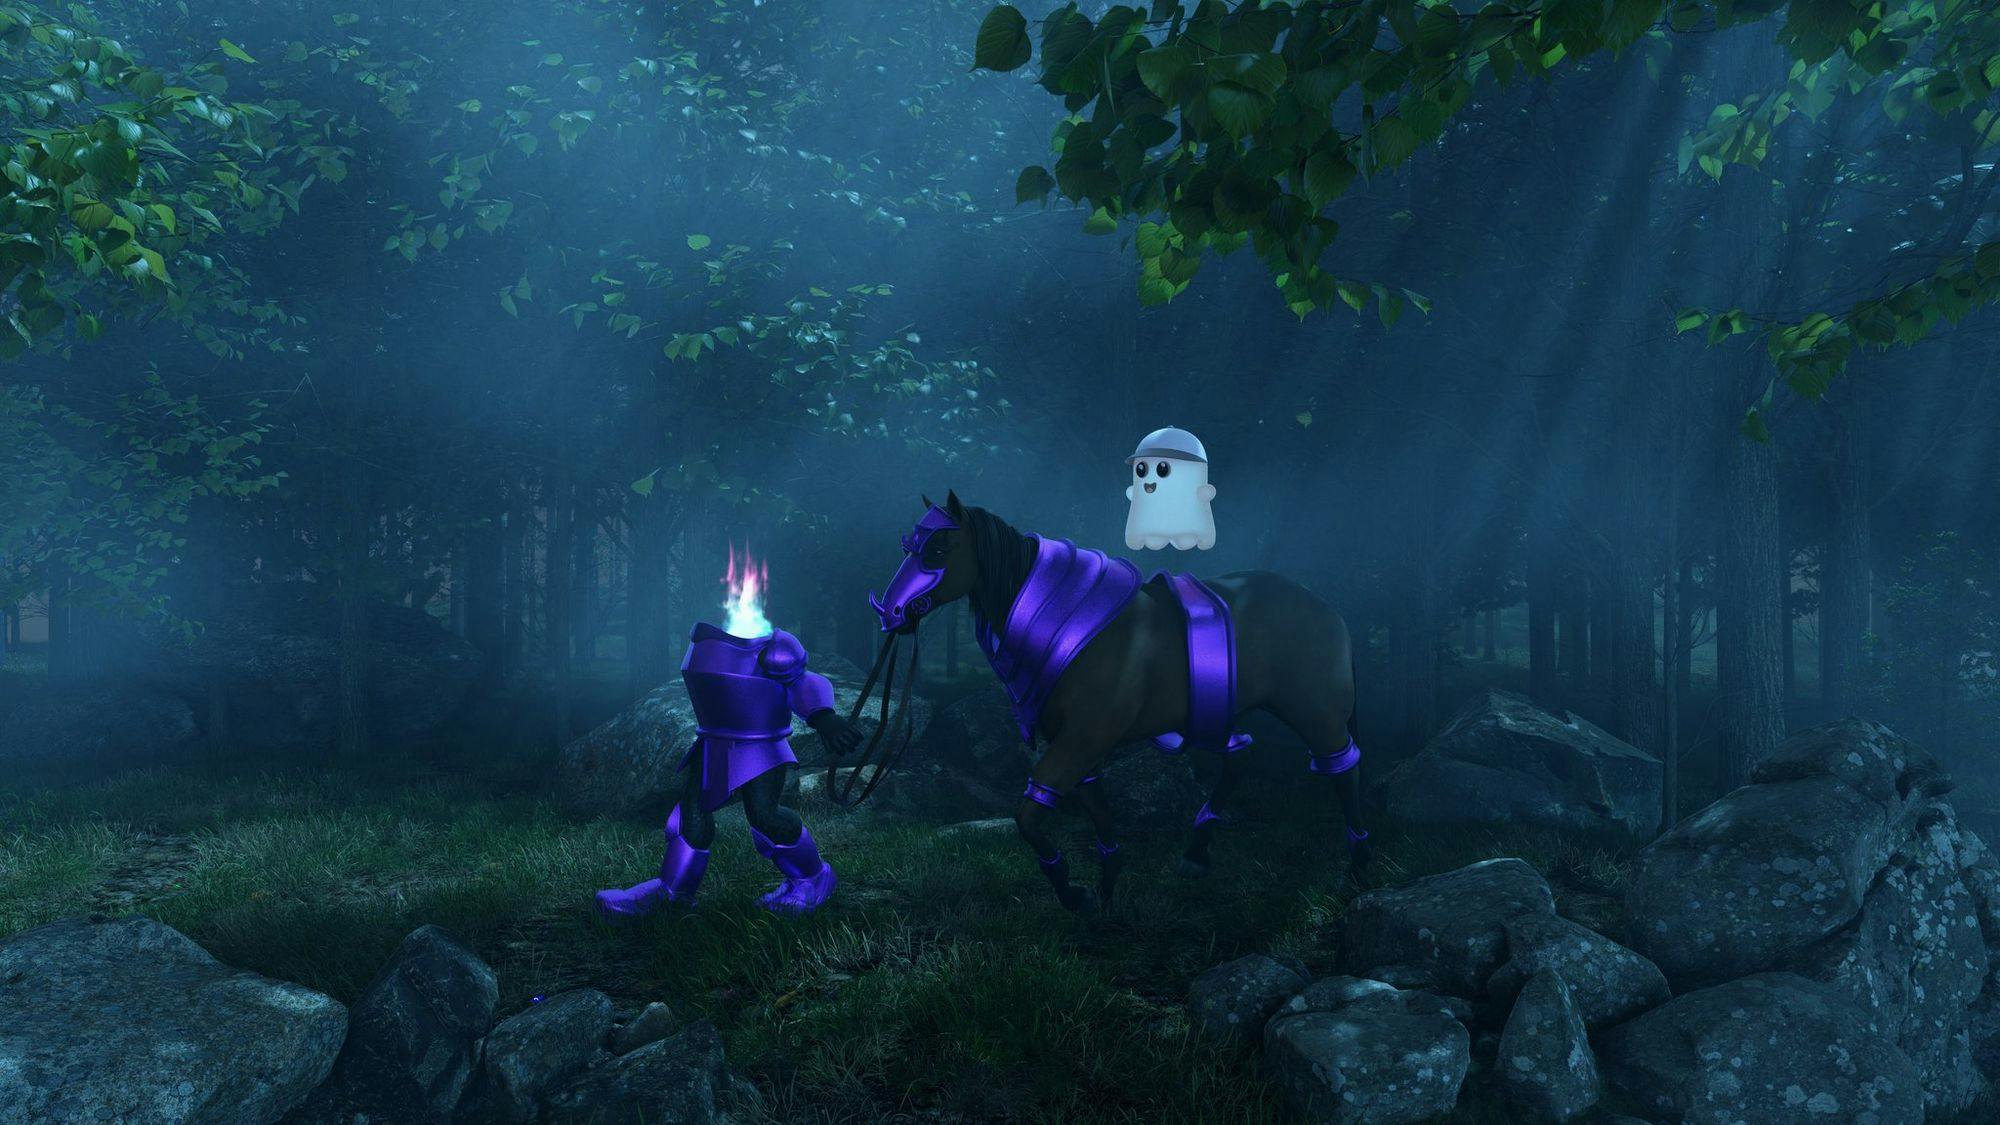 A Ghost Knight guiding a horse and GHOst in the woods.